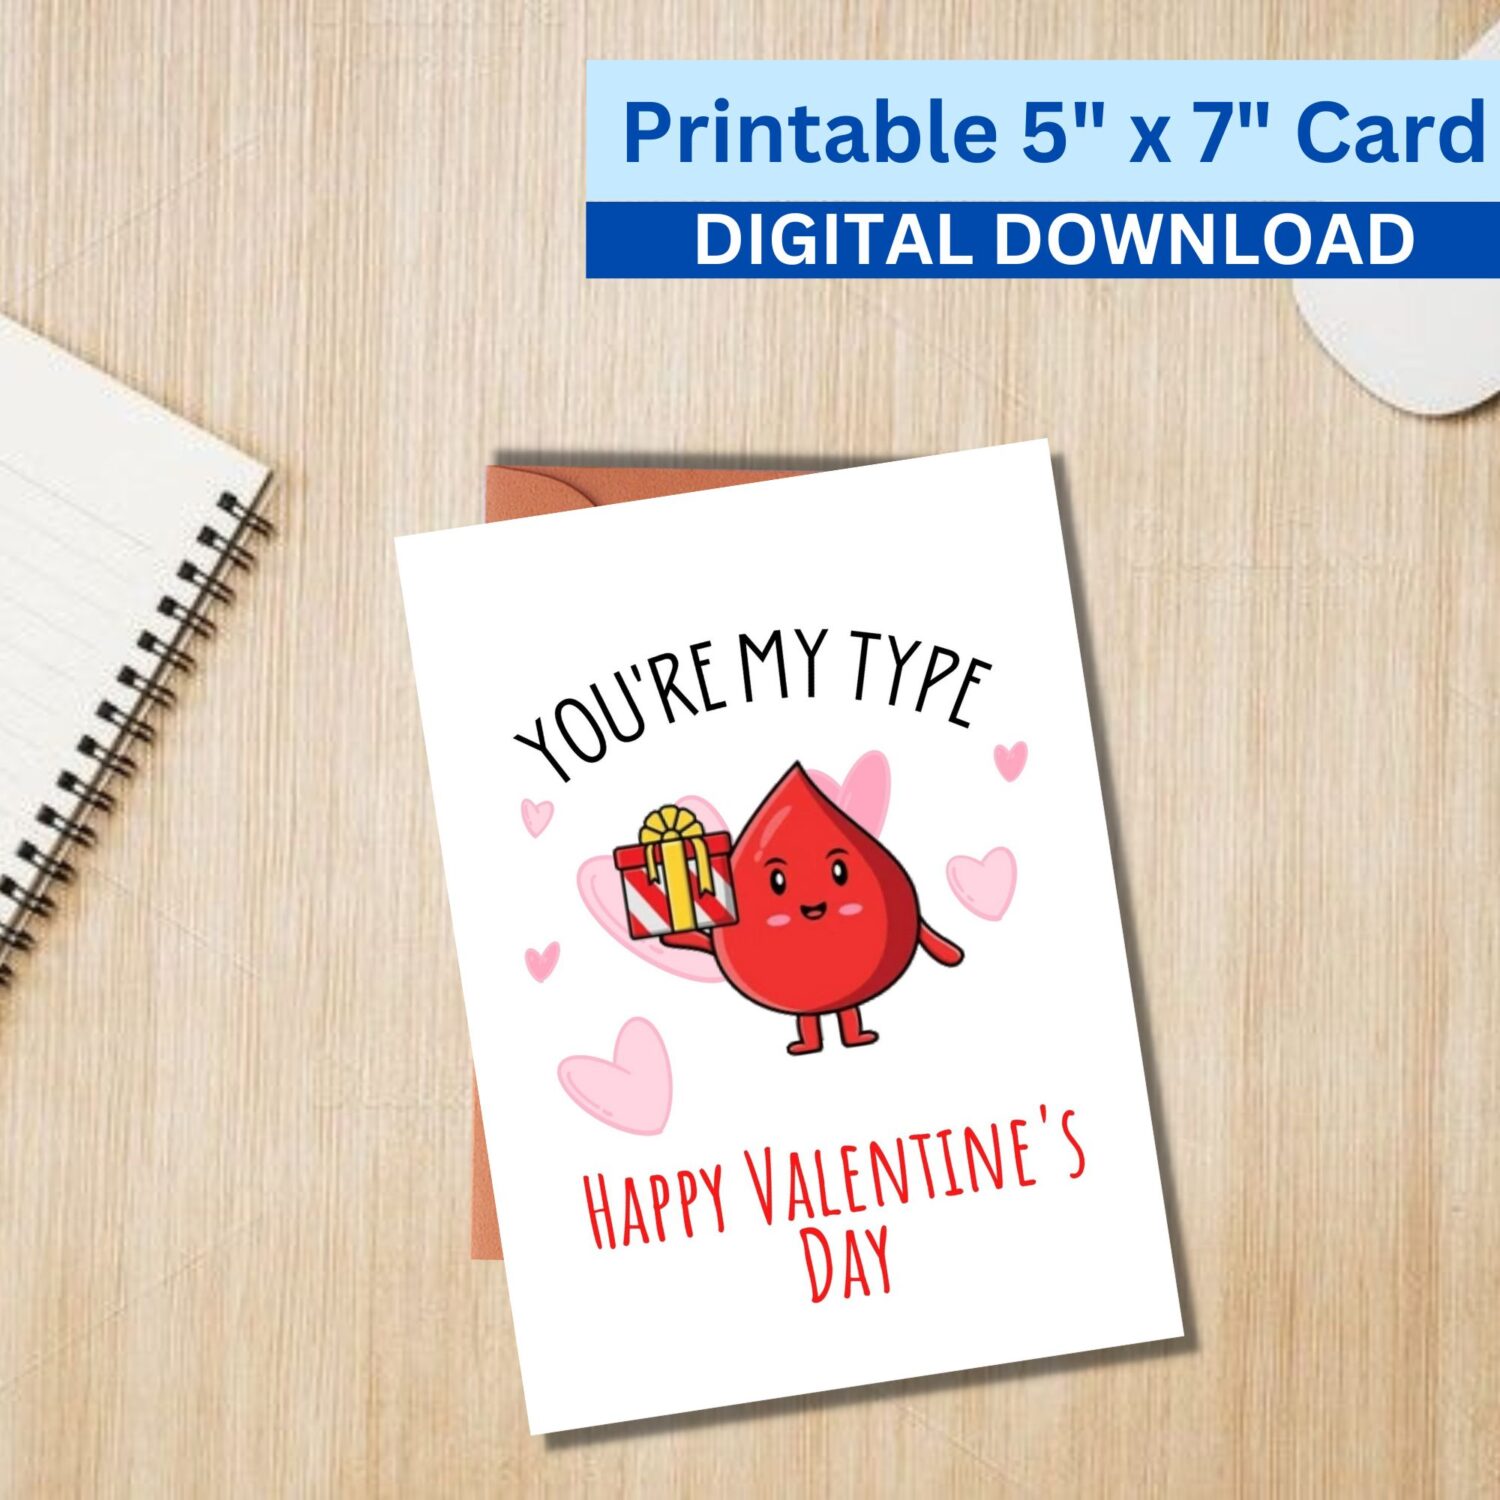 Free Printable Valentine Cards for Kids: Fun and Easy DIY Ideas -  California Unpublished